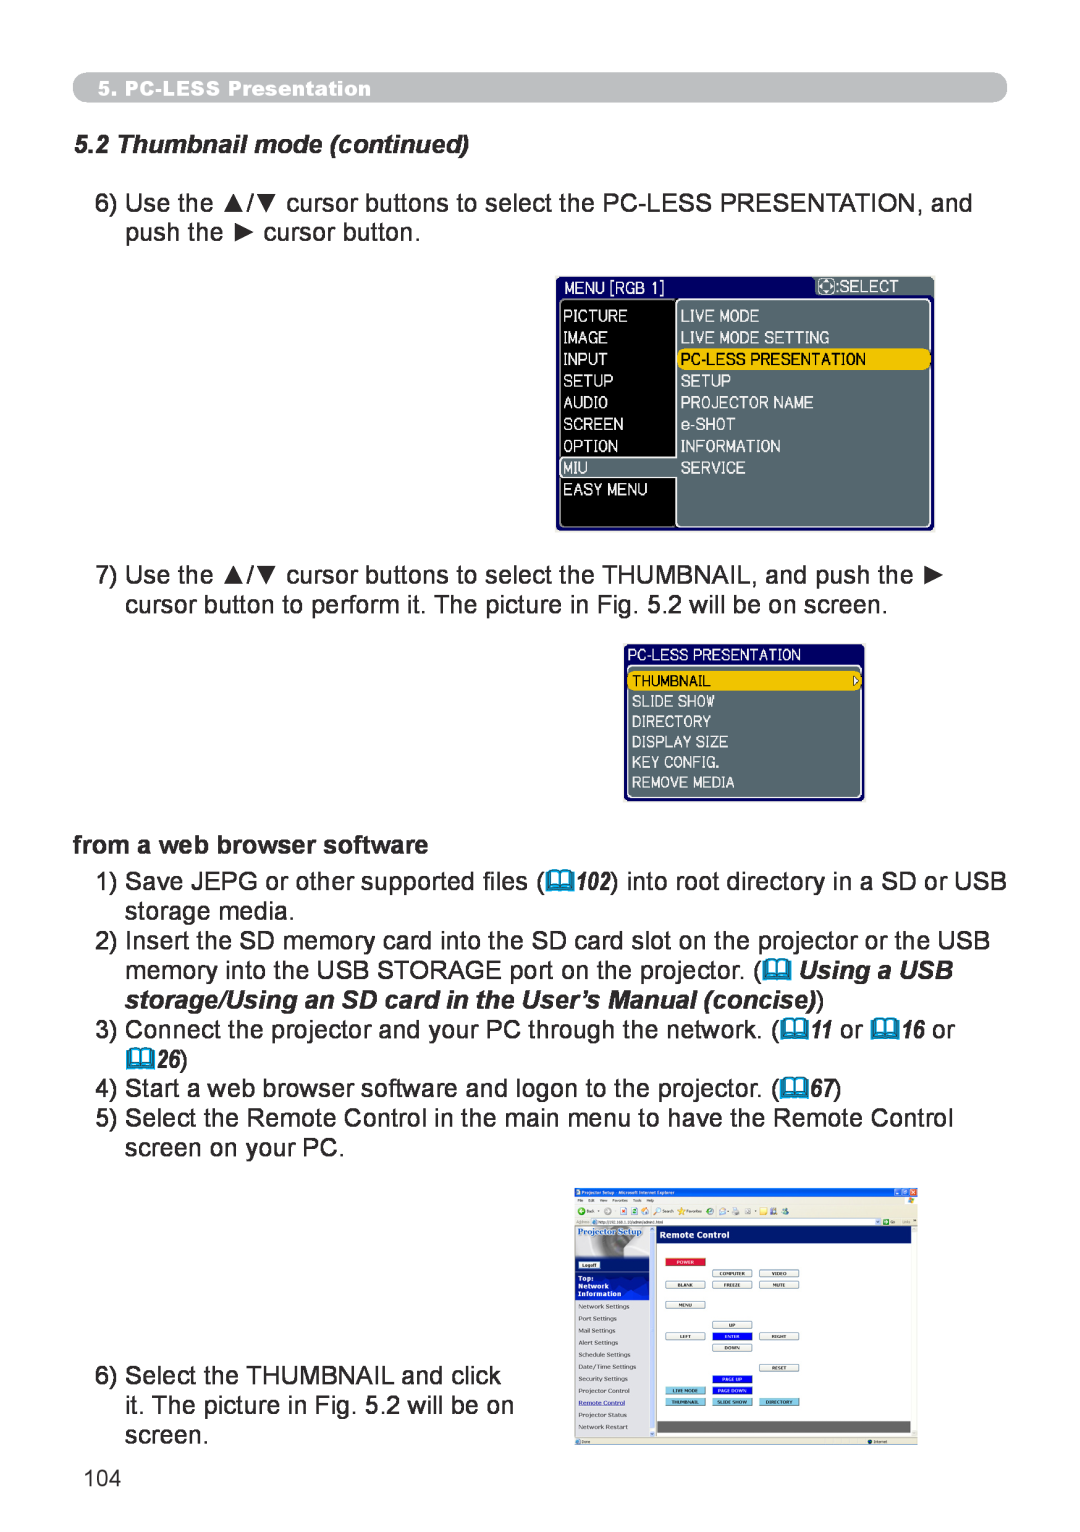 Hitachi CP-X267 user manual 5.2Thumbnail mode continued, from a web browser software 